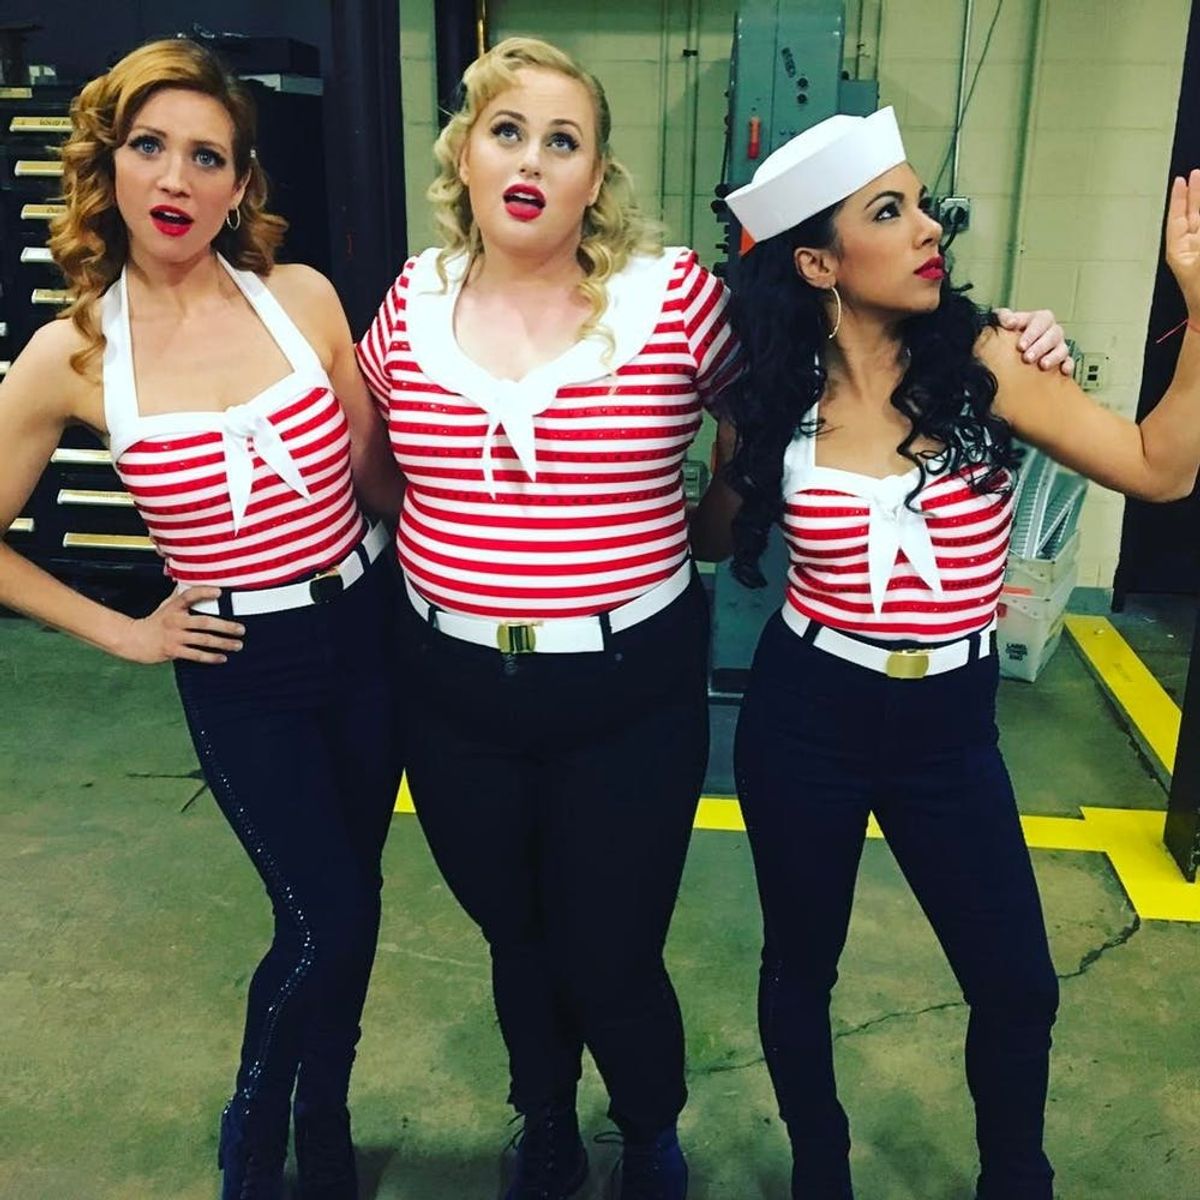 Pitch Perfect’s Stylist Deftly Responds to Costume Controversy